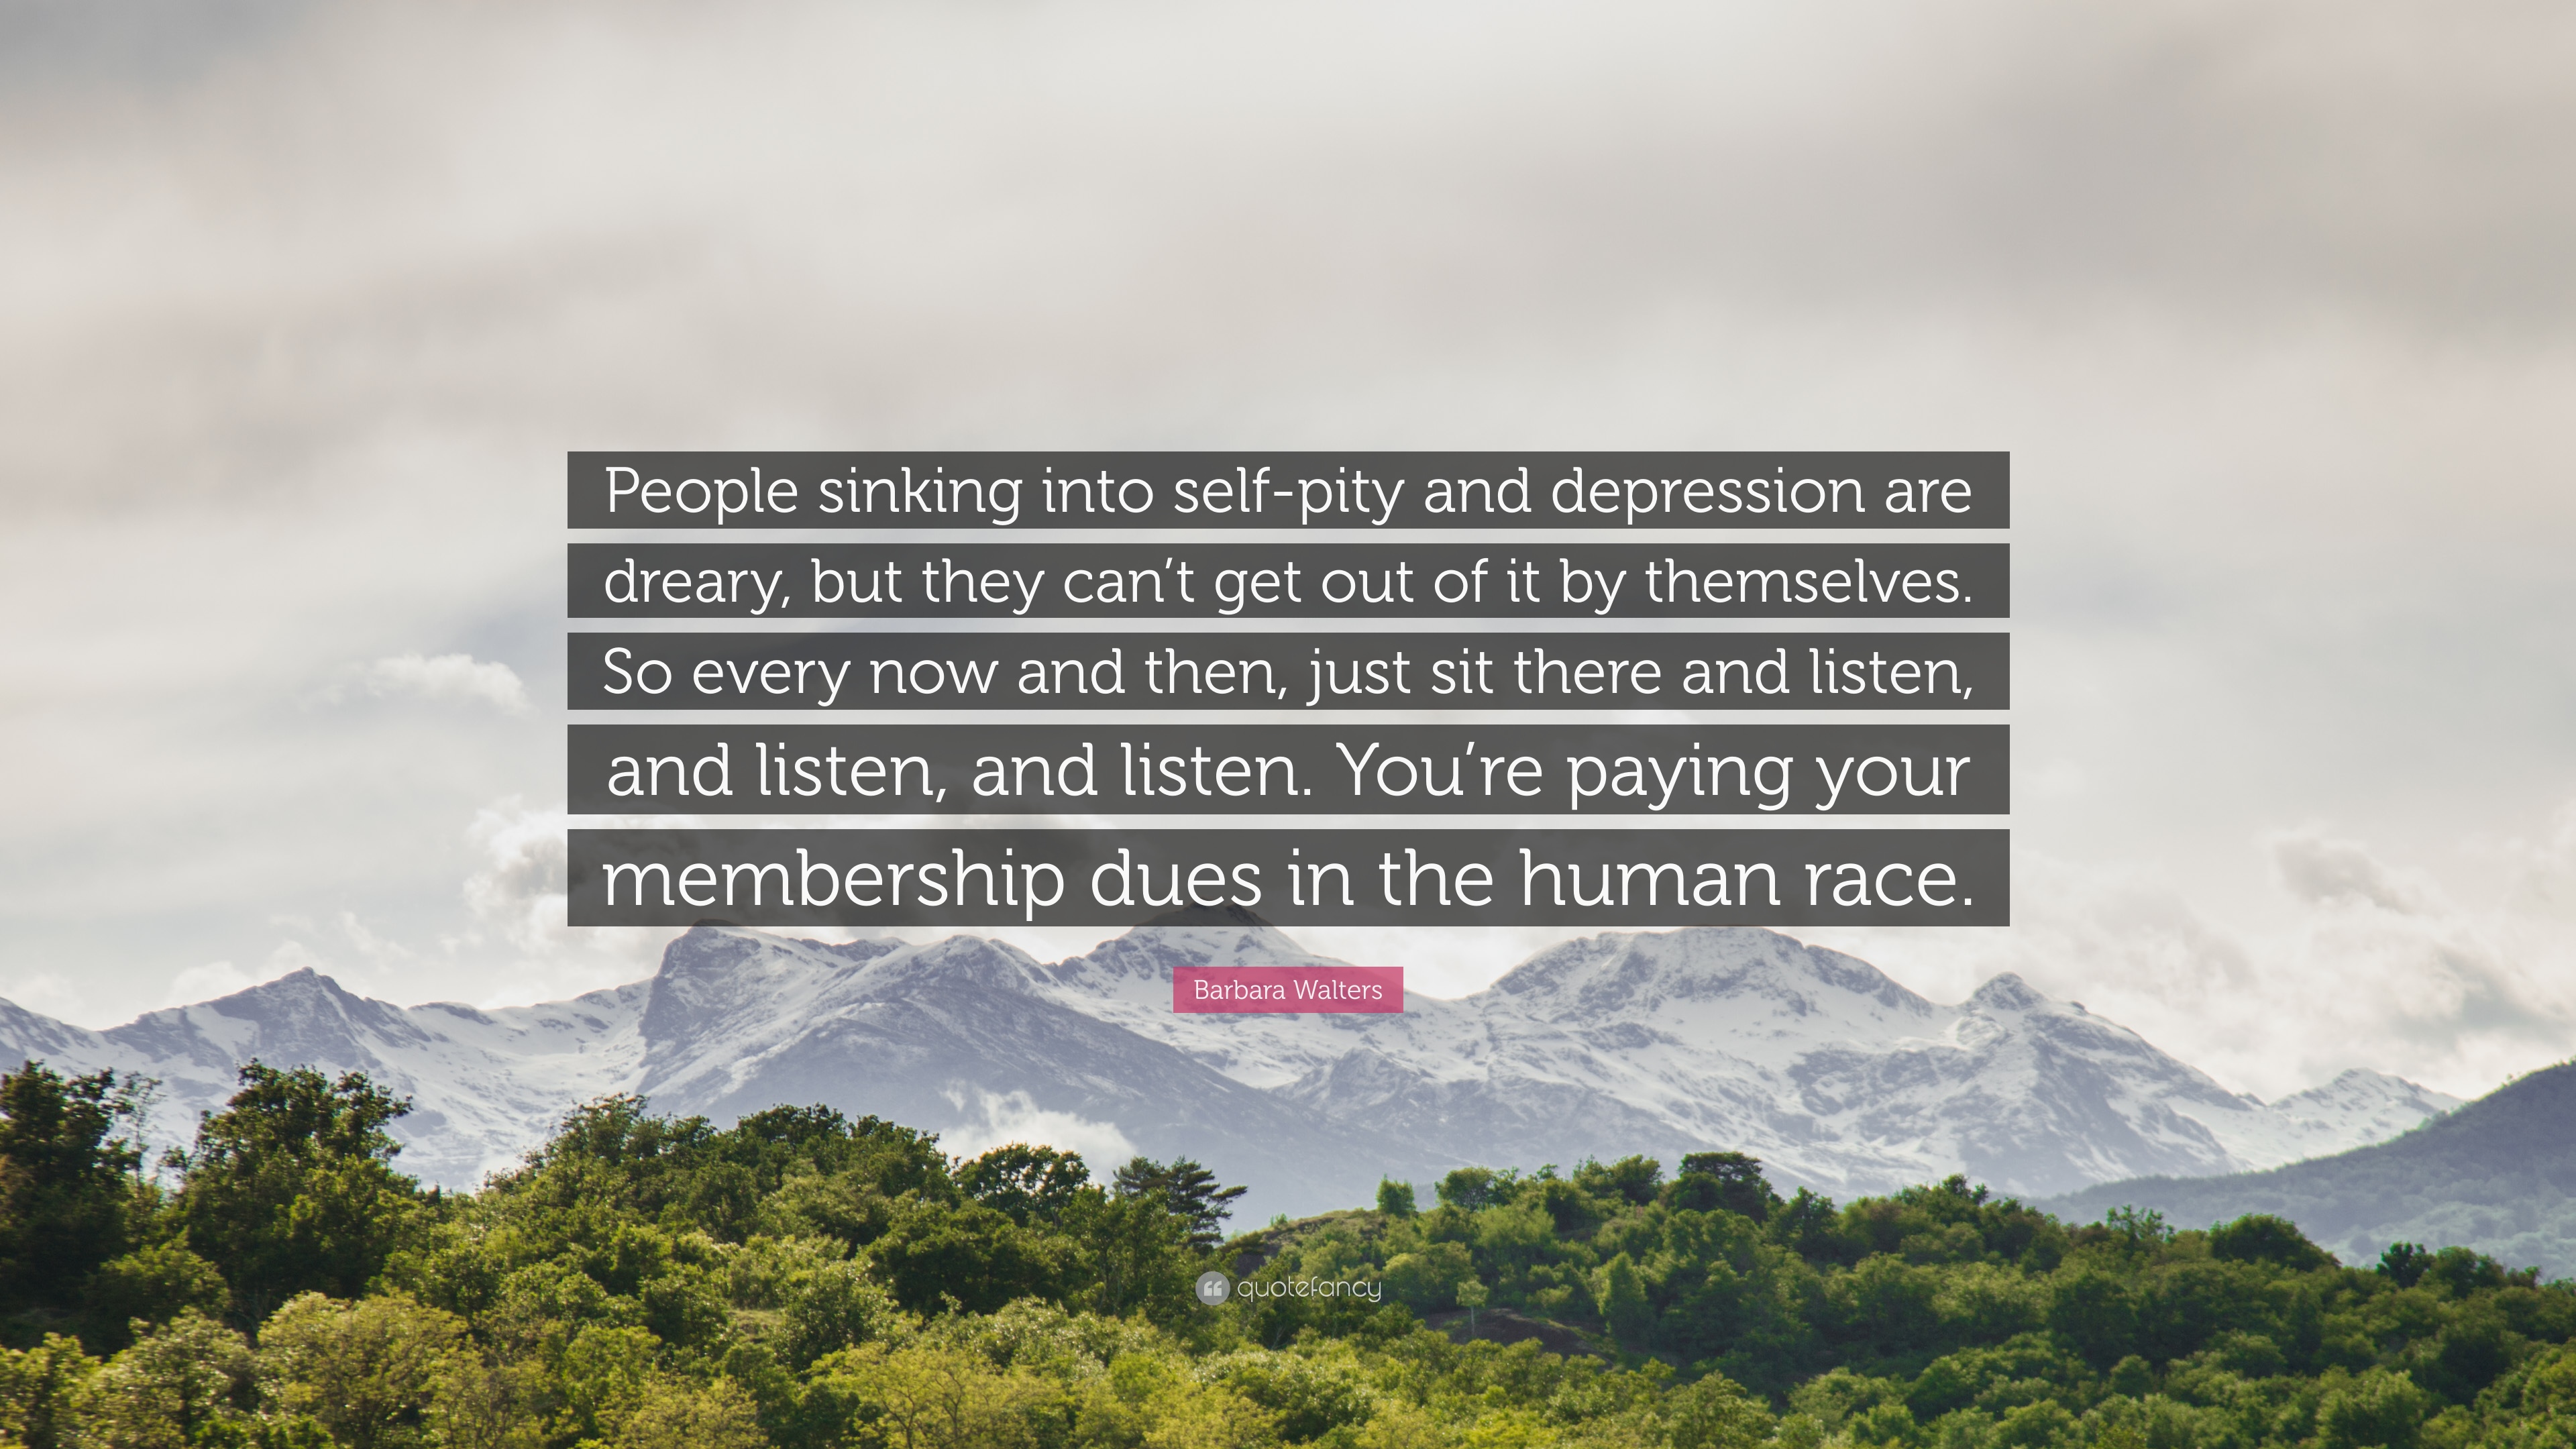 Barbara walters quote âpeople sinking into self